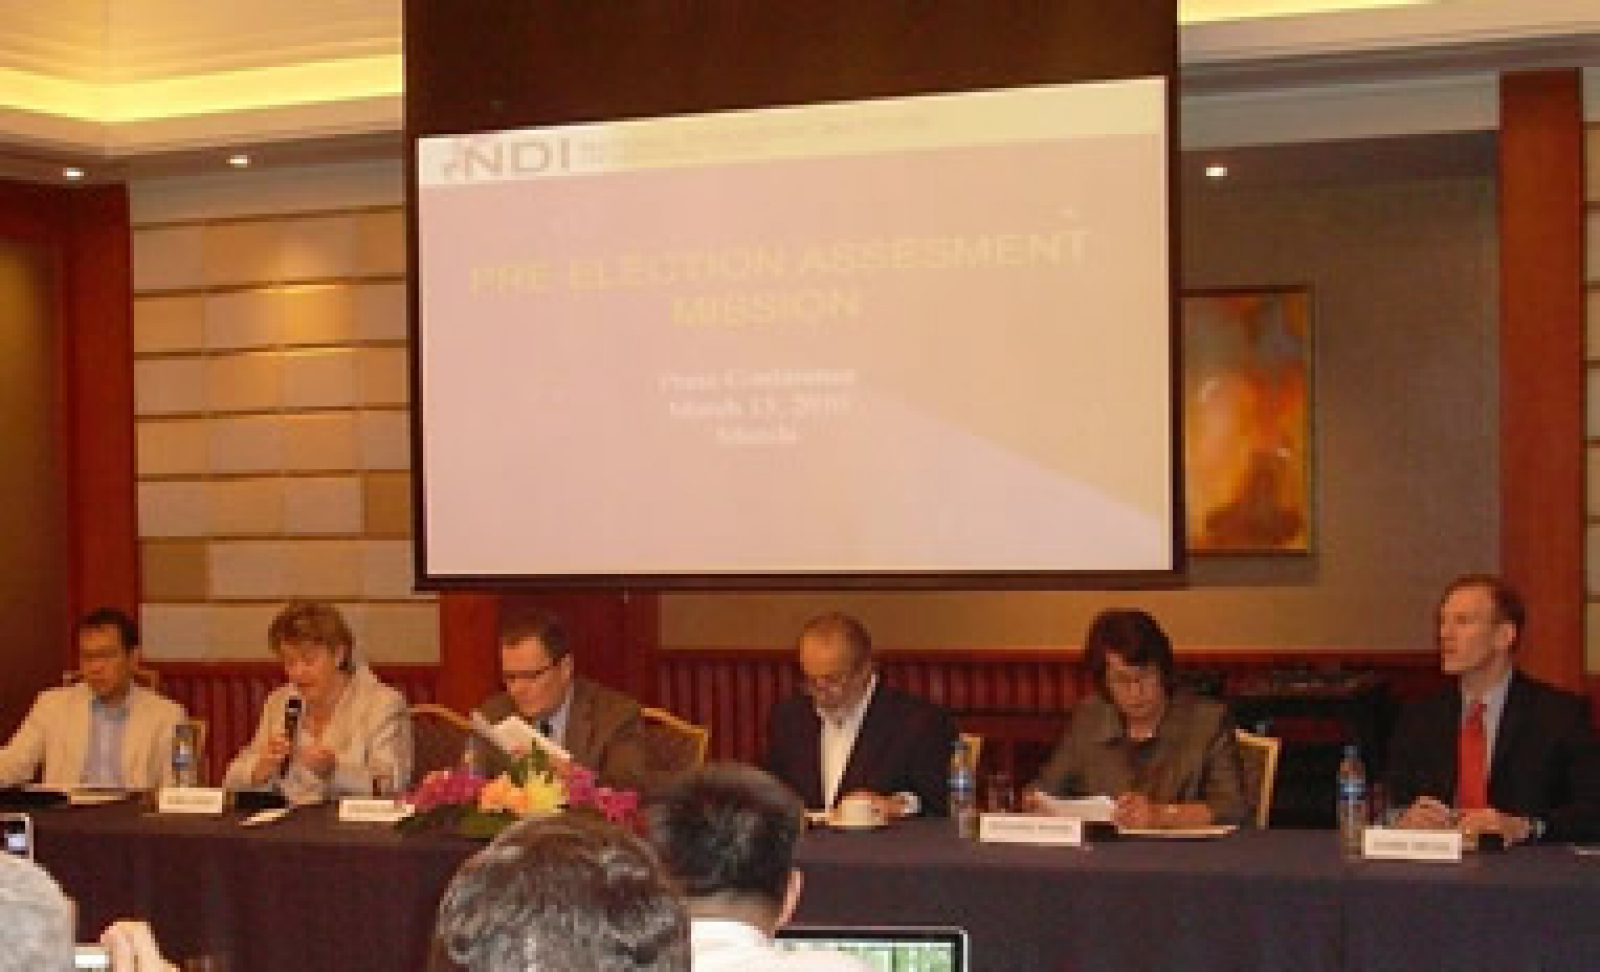 More Work Needed to Develop Public Trust in New Philippine Automated Voting System, NDI Delegation Says